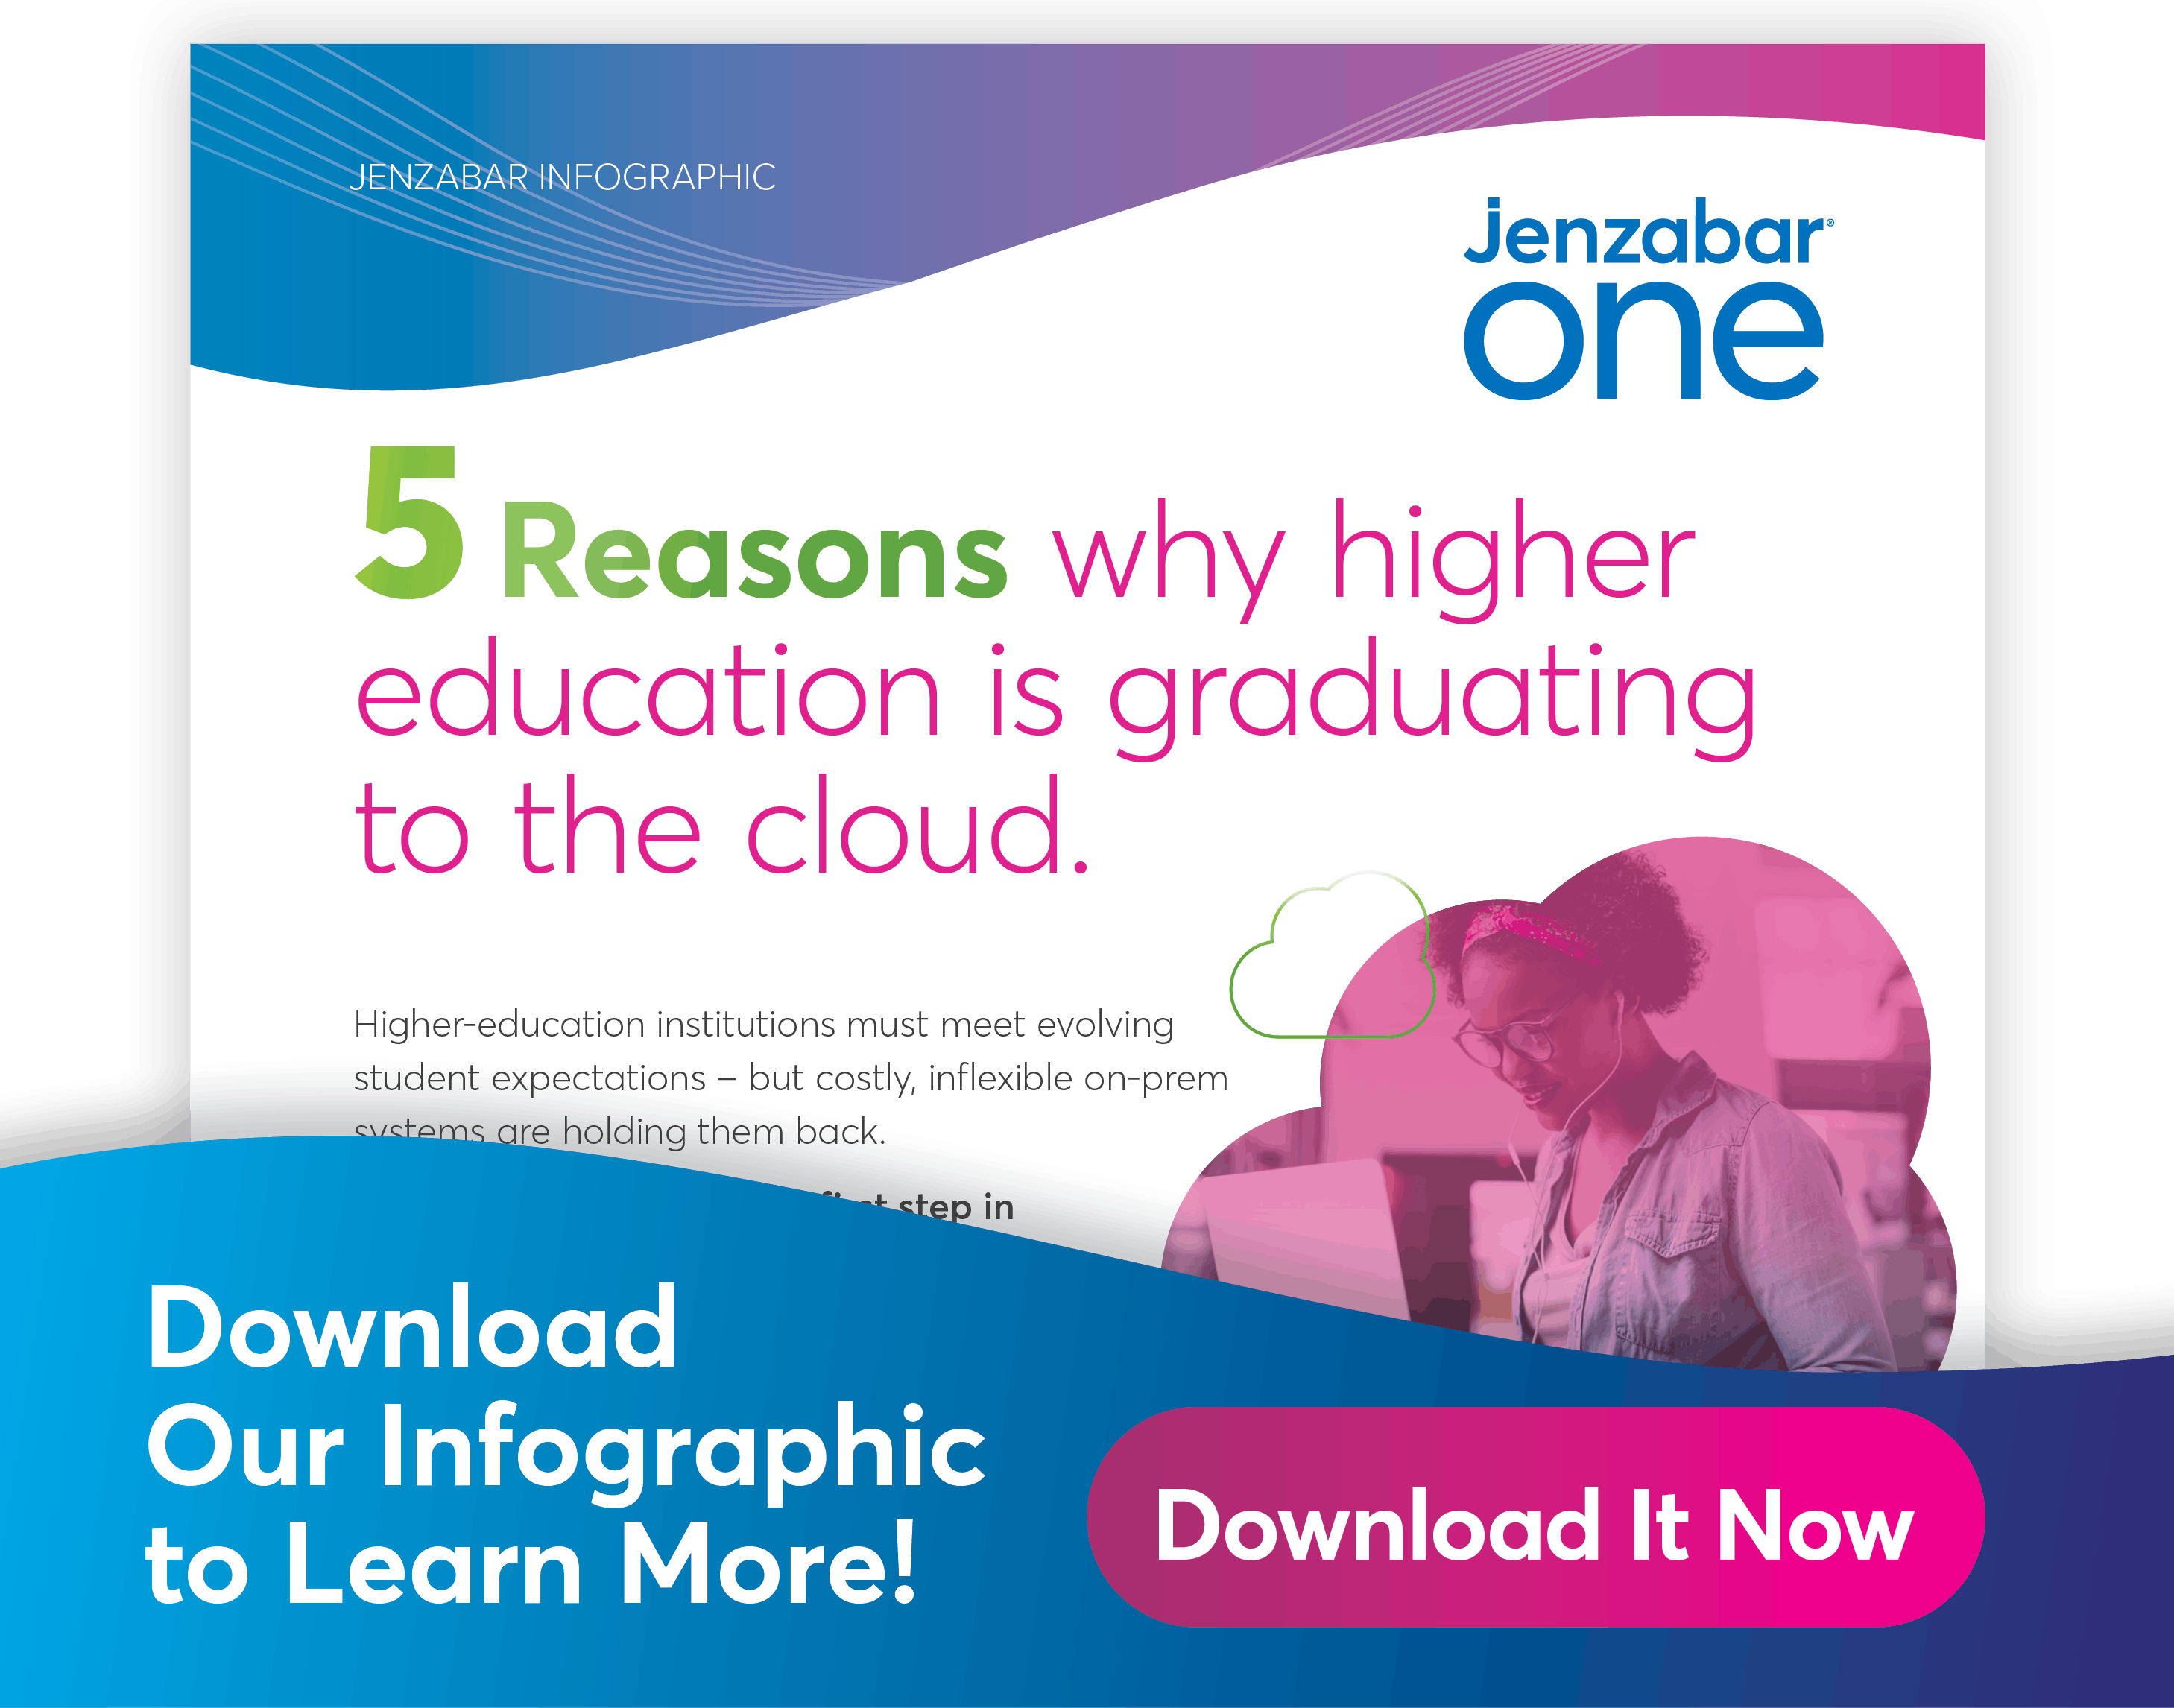 5 Reasons Why Higher Education is Graduating to the Cloud